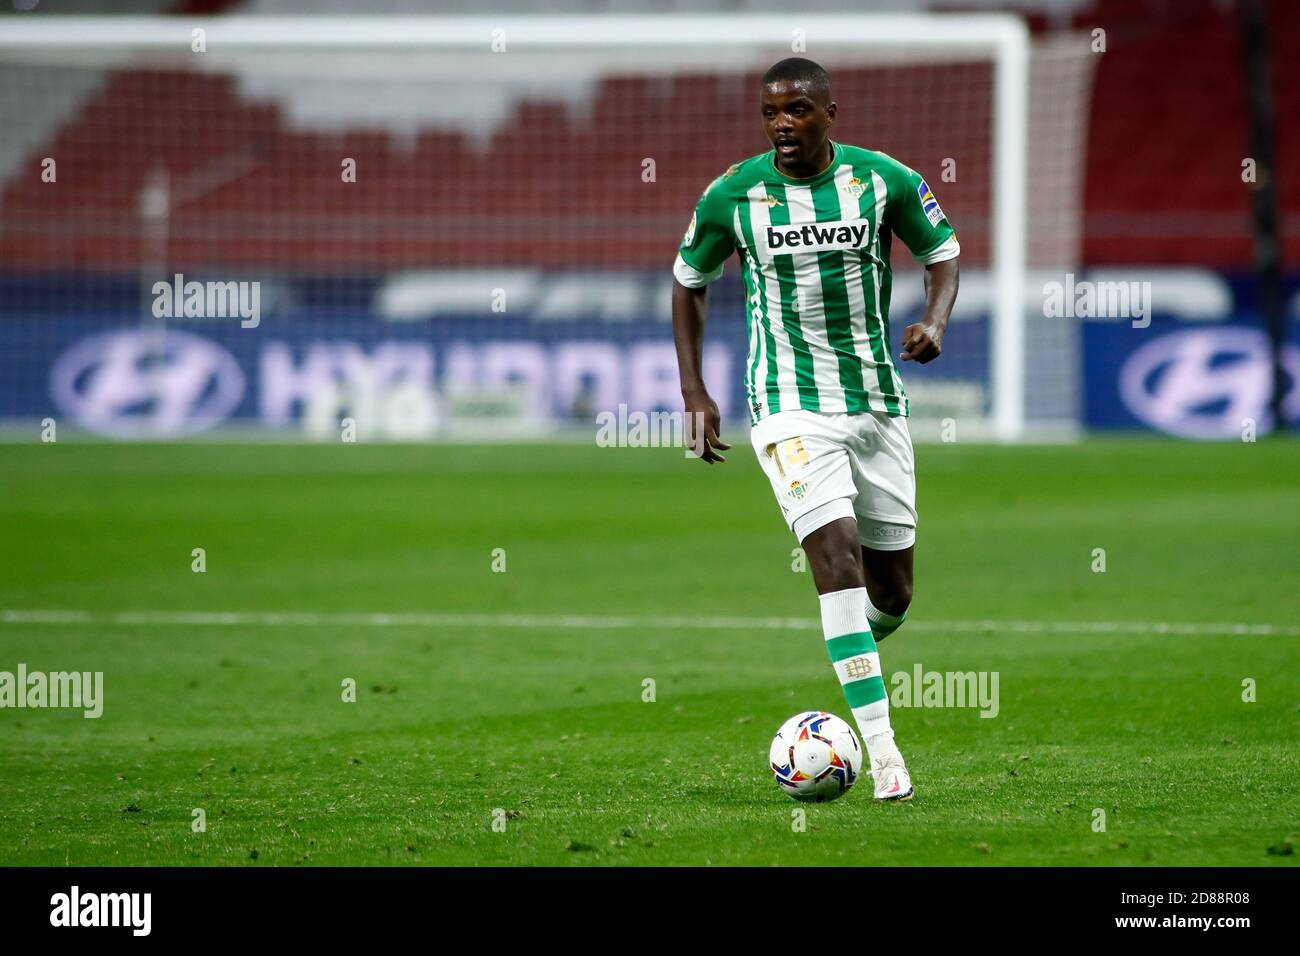 William Carvalho of Real Betis in action during the Spanish championship La Liga football match between Atletico de Madrid and Real Betis Balompie o C Stock Photo